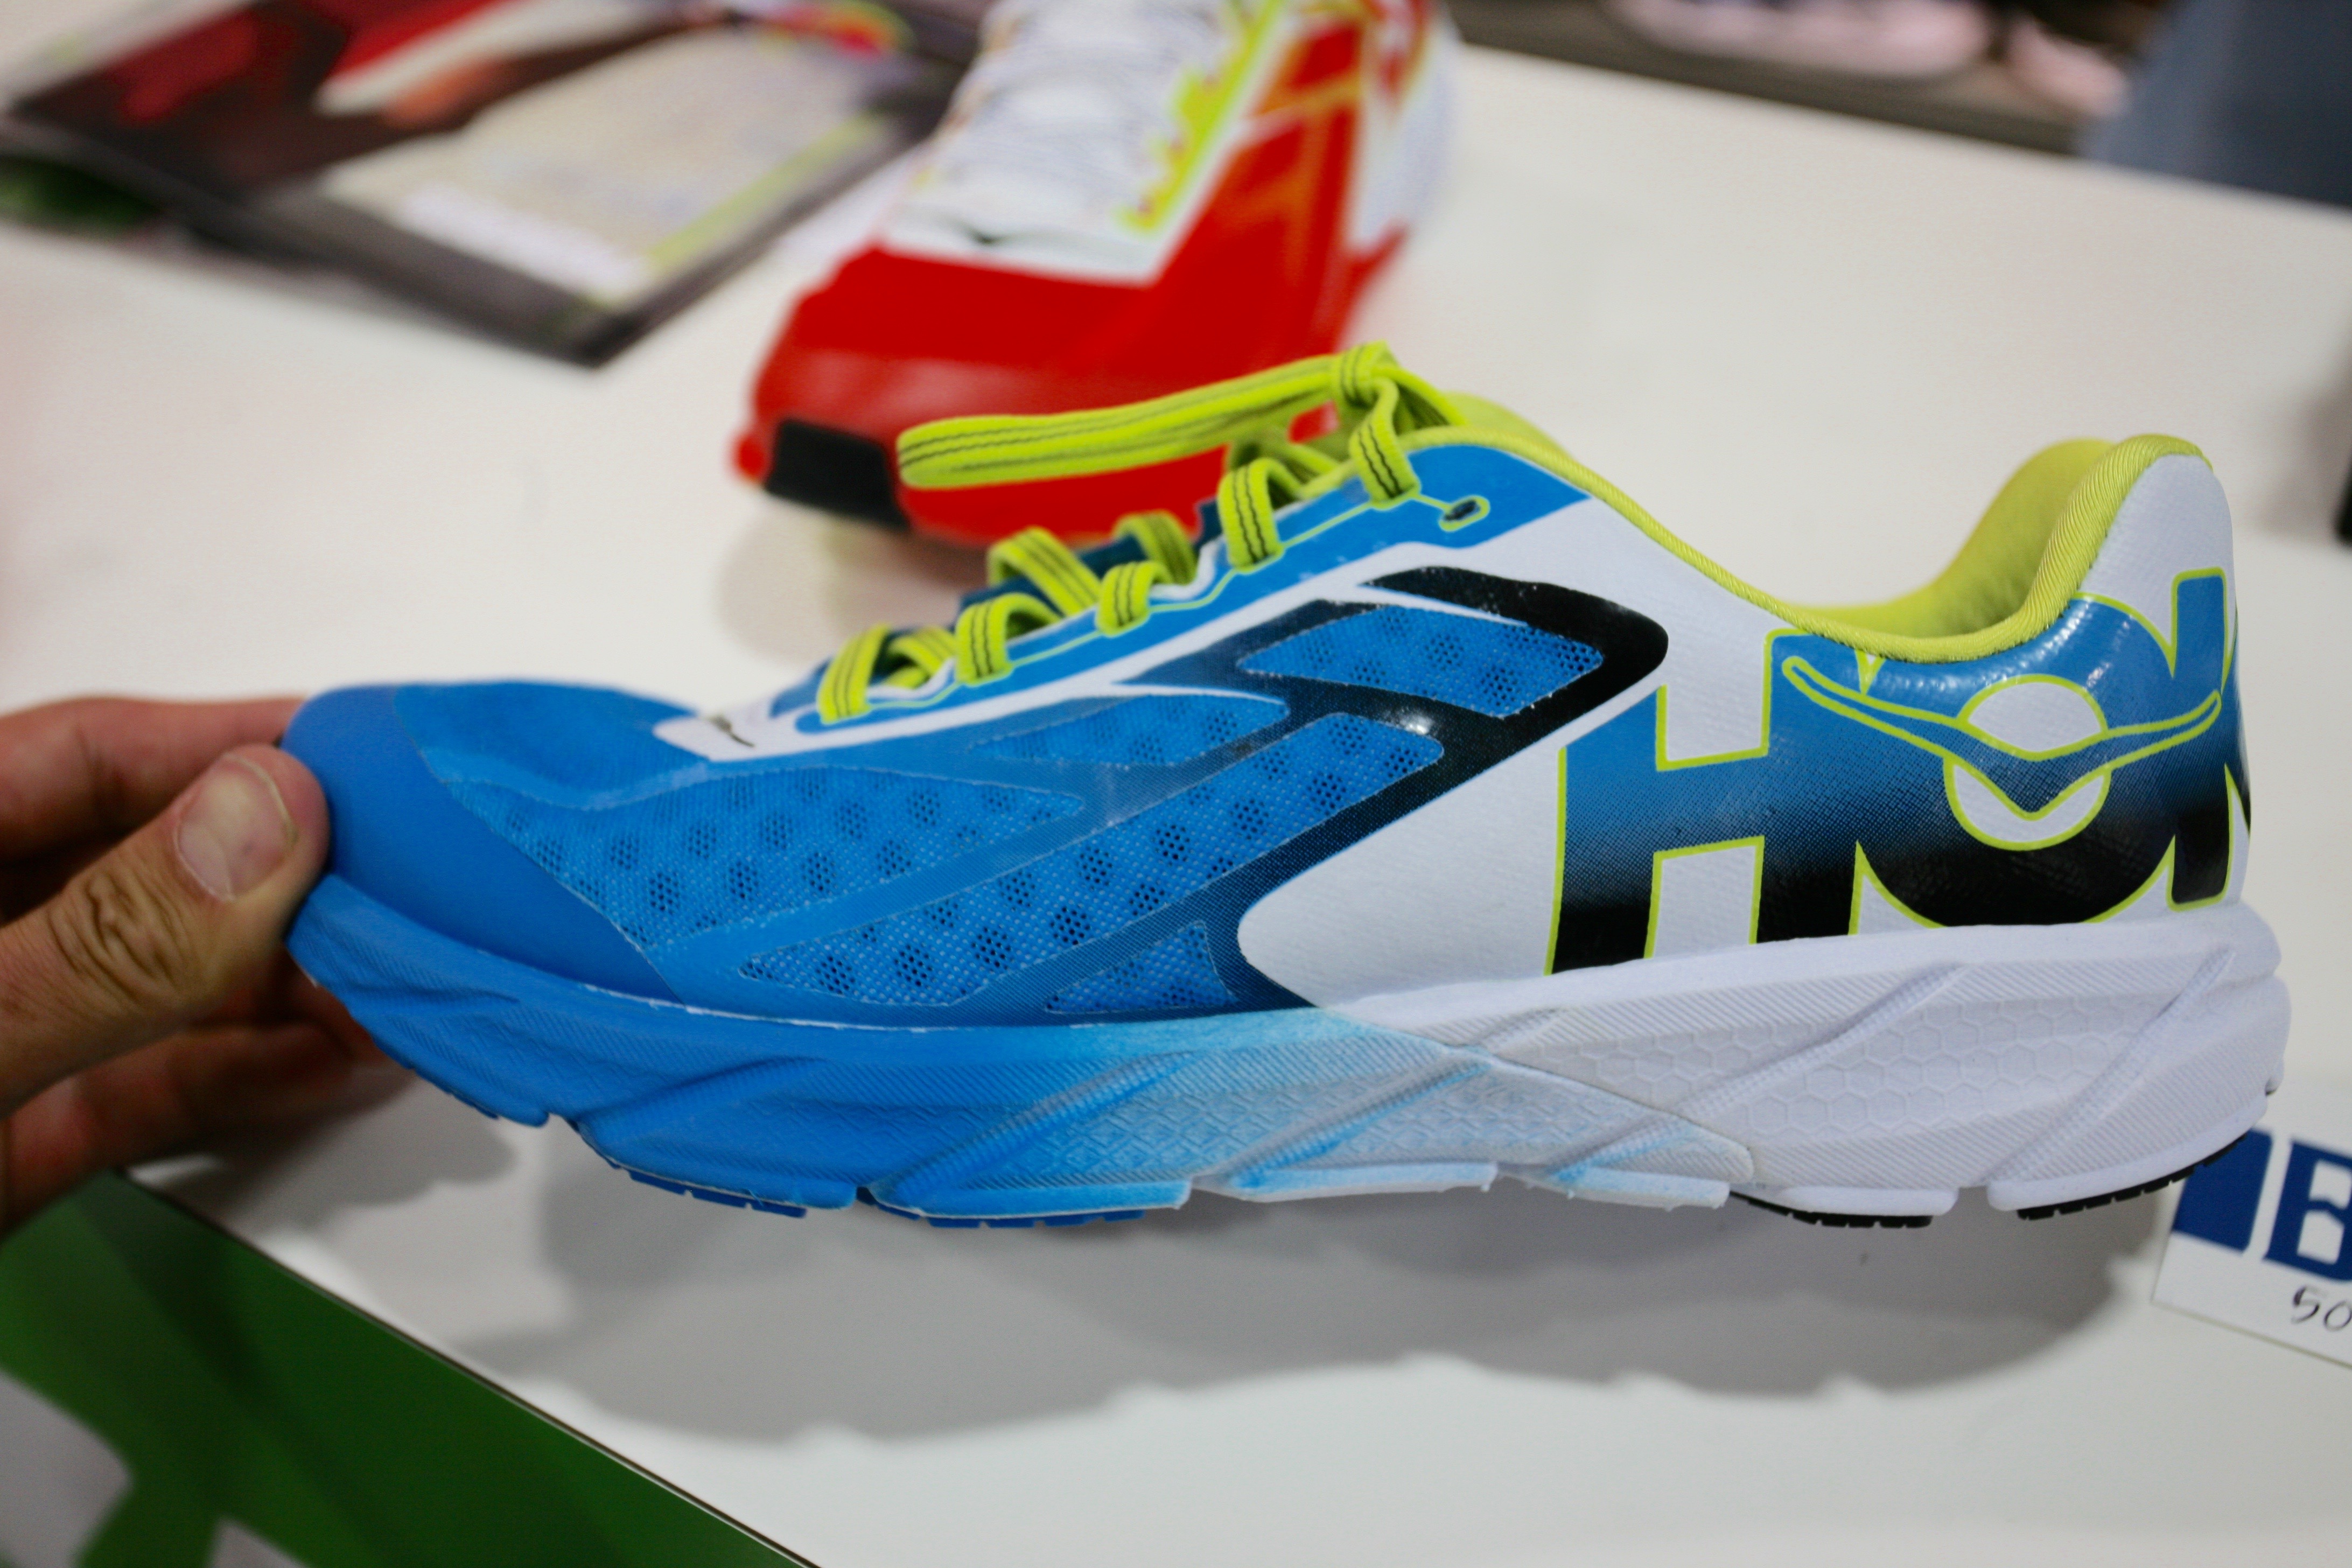 New Shoe Roundup: Road Racing Shoes Coming in 2016